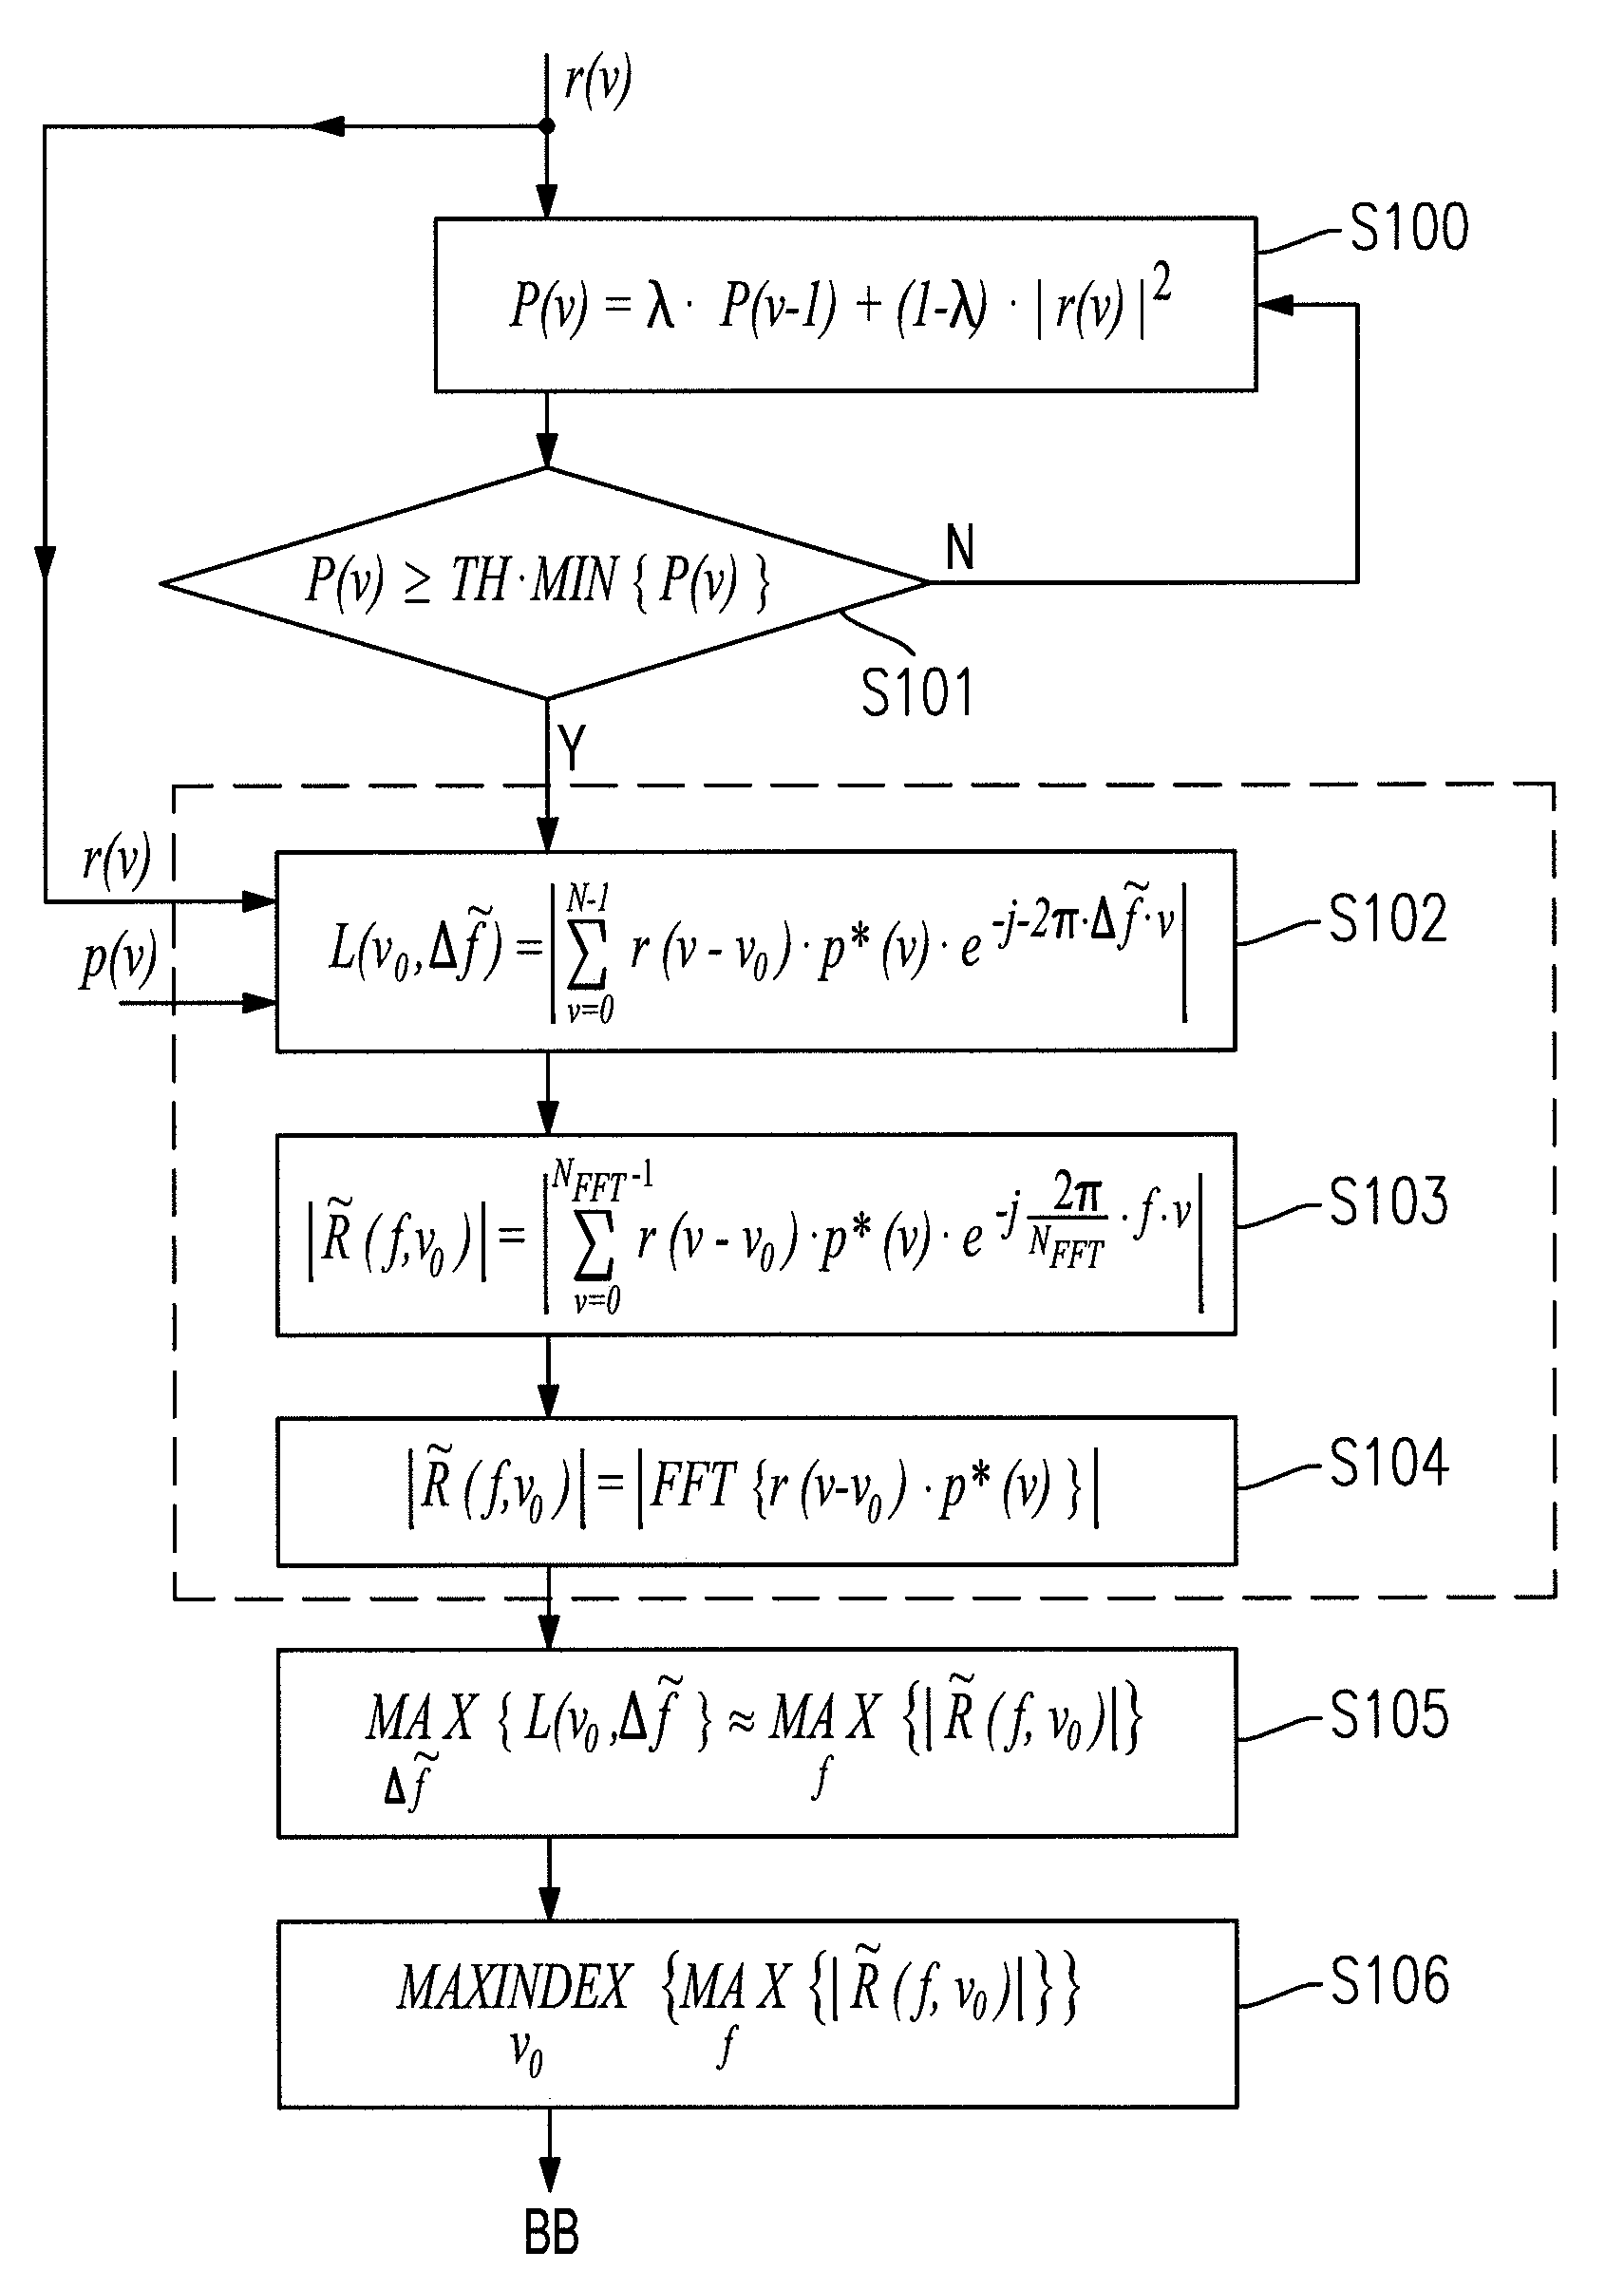 Procedure for seizing the beginning of an active signal section